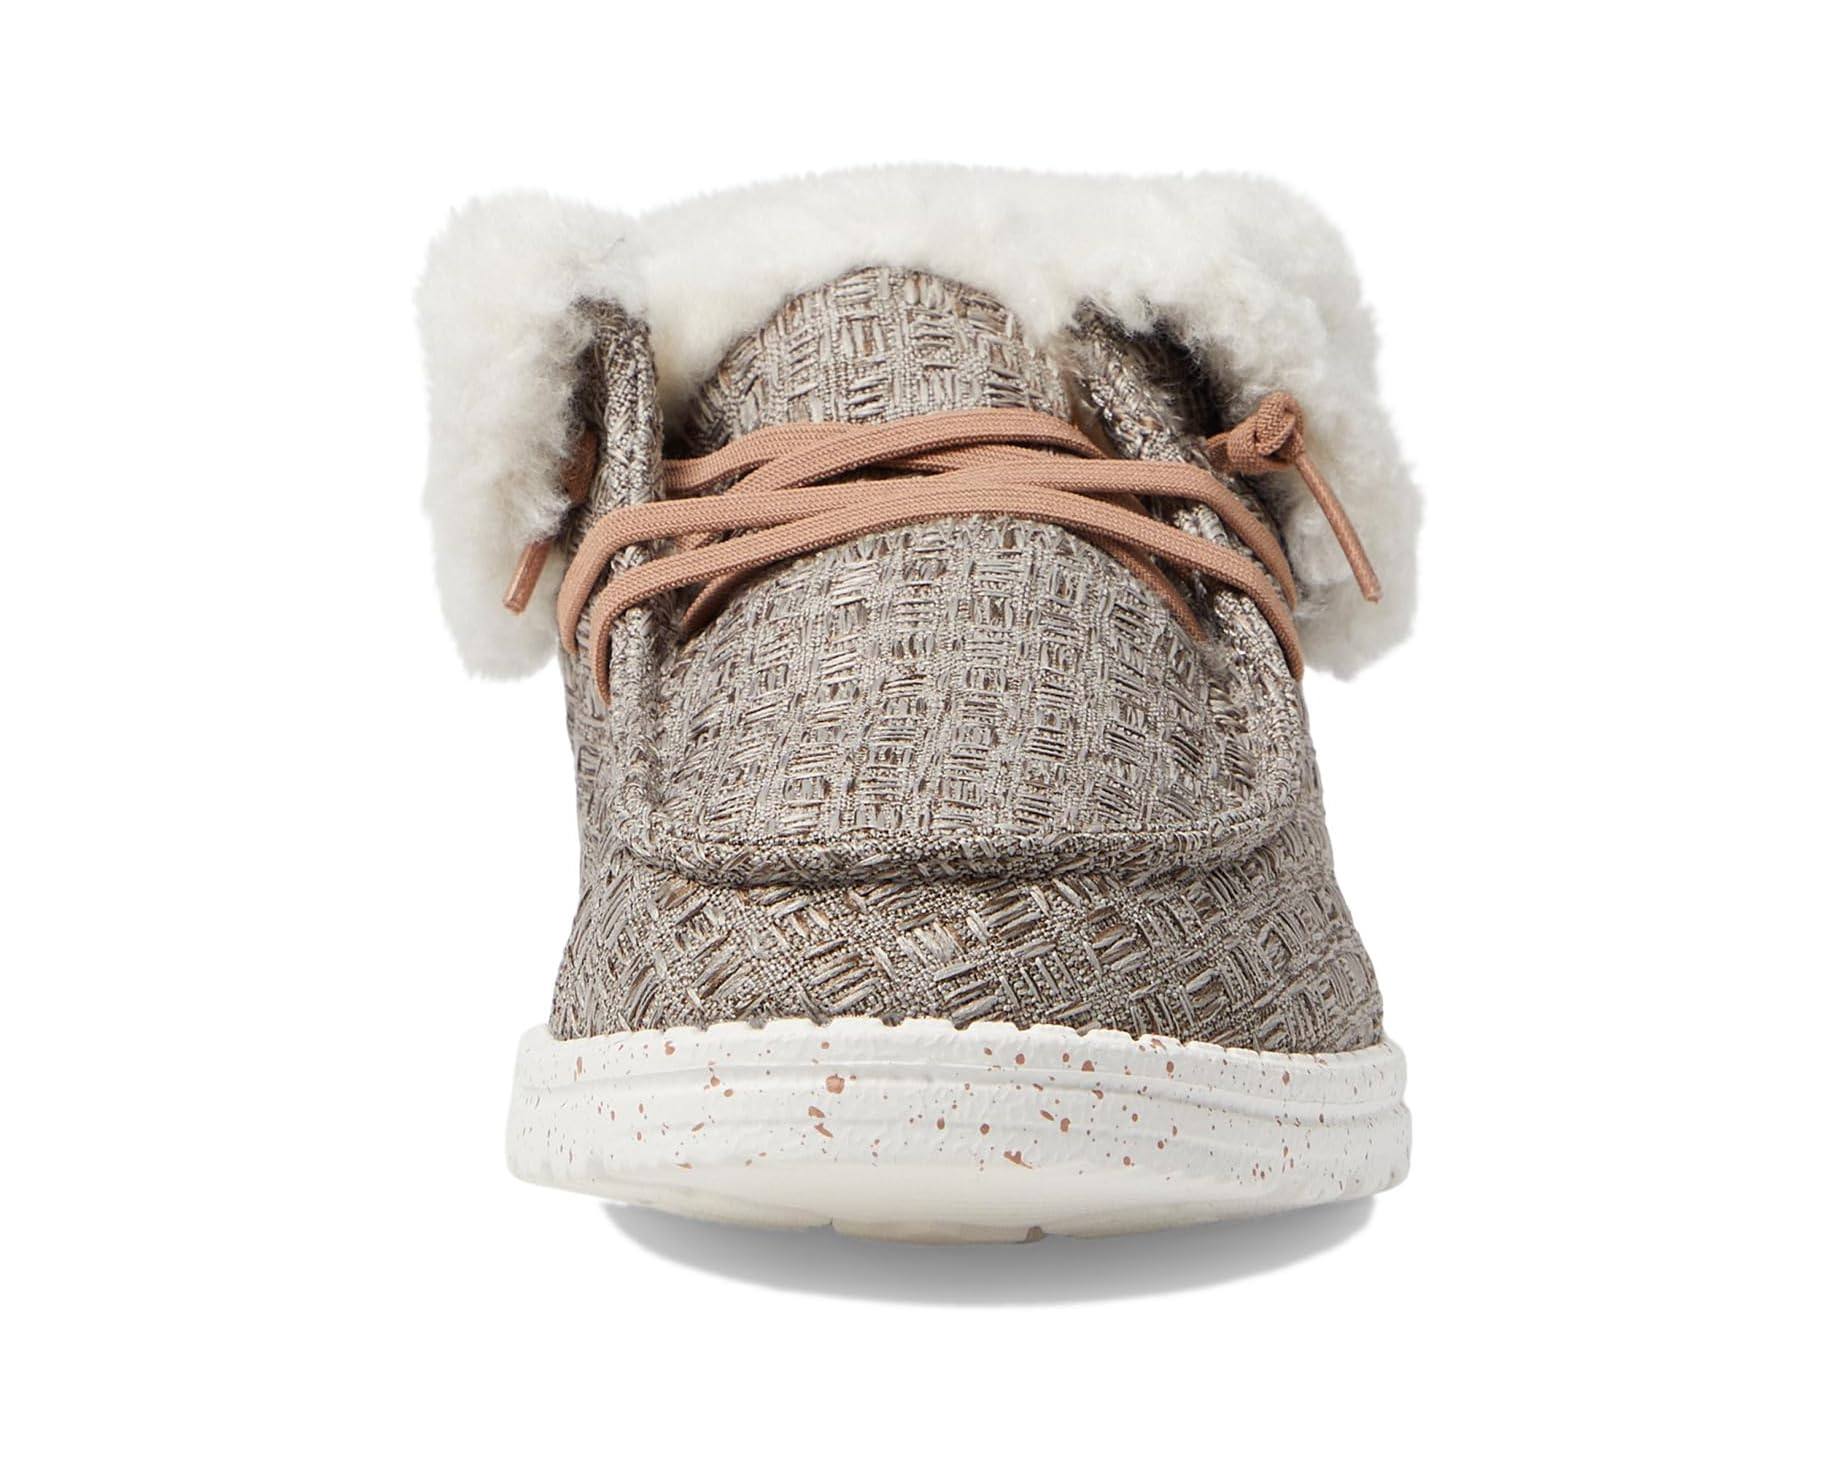 Wendy Fold Stitch Cozy - The Shoe CollectiveHey Dude